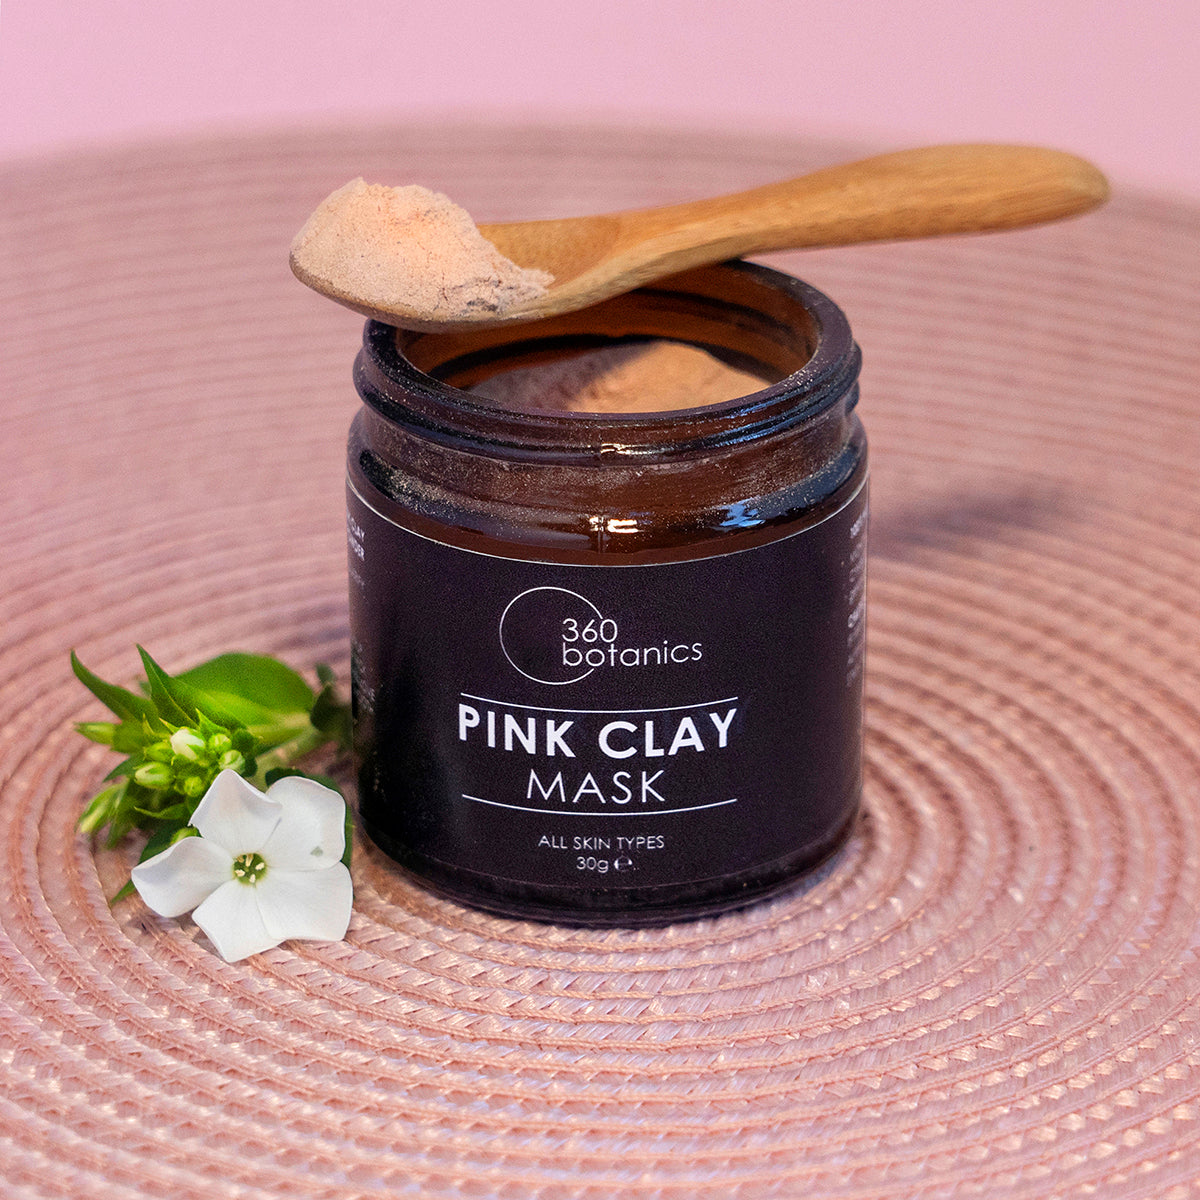 pink clay mask powder open with wooden spoon on pink background